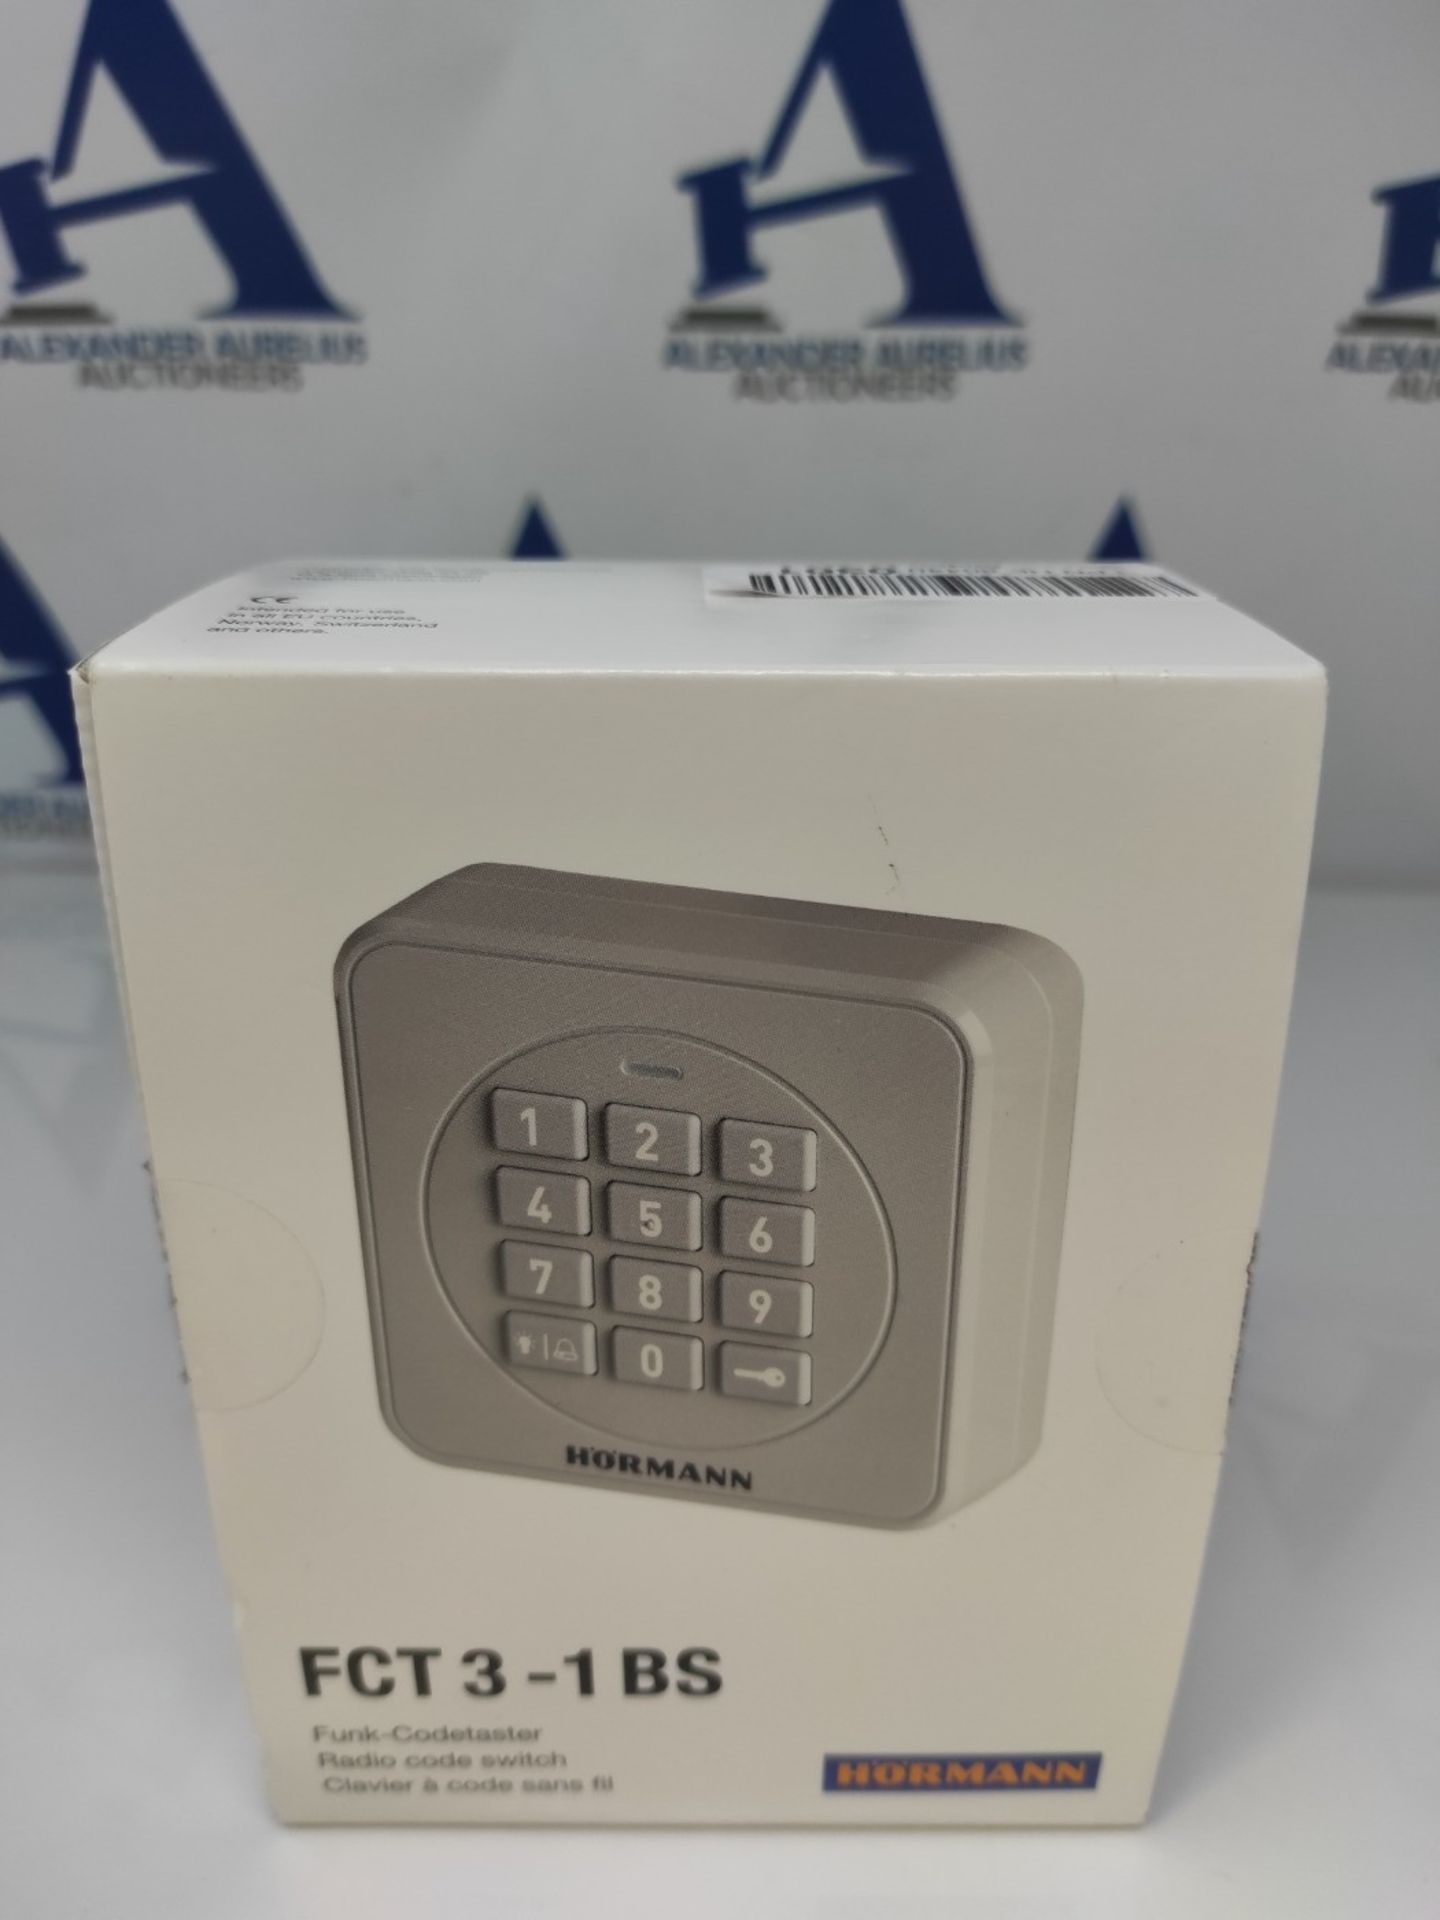 RRP £83.00 Hörmann Radio Coded Keypad FCT3-1 BS (868 MHz, for controlling up to 3 garage doors, - Image 2 of 3